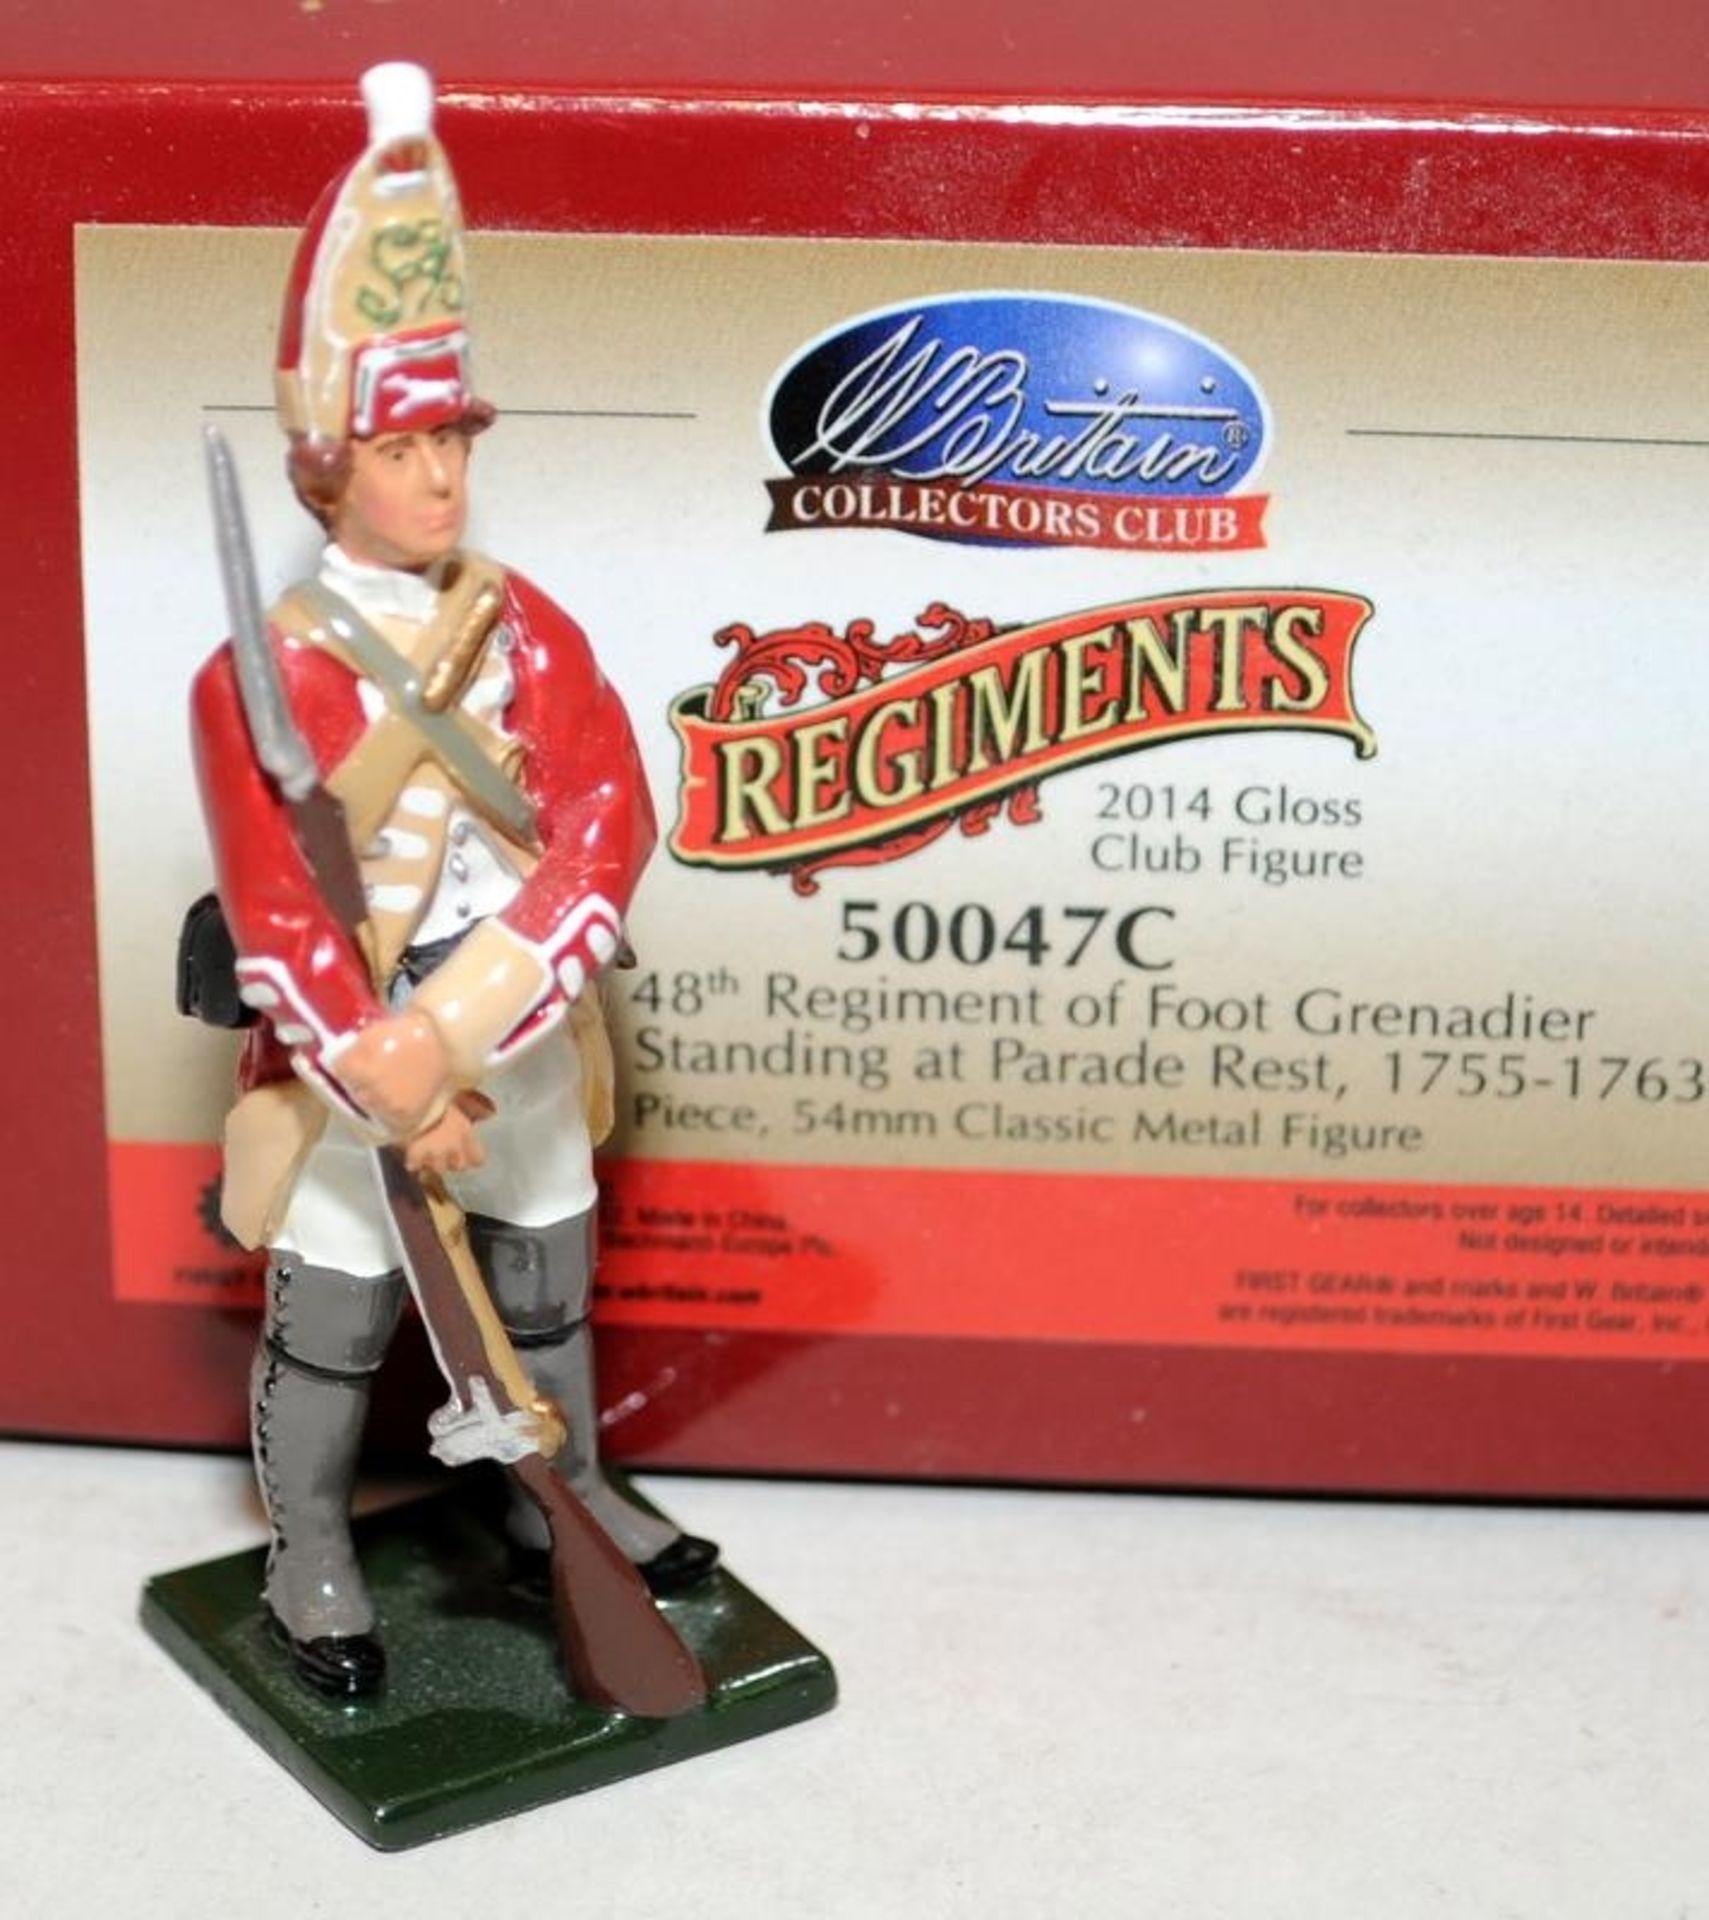 Britain's Museum Collection 10003 Black Watch Highland Grenadier 1758 c/w 48th Regiment of Foot - Image 3 of 4